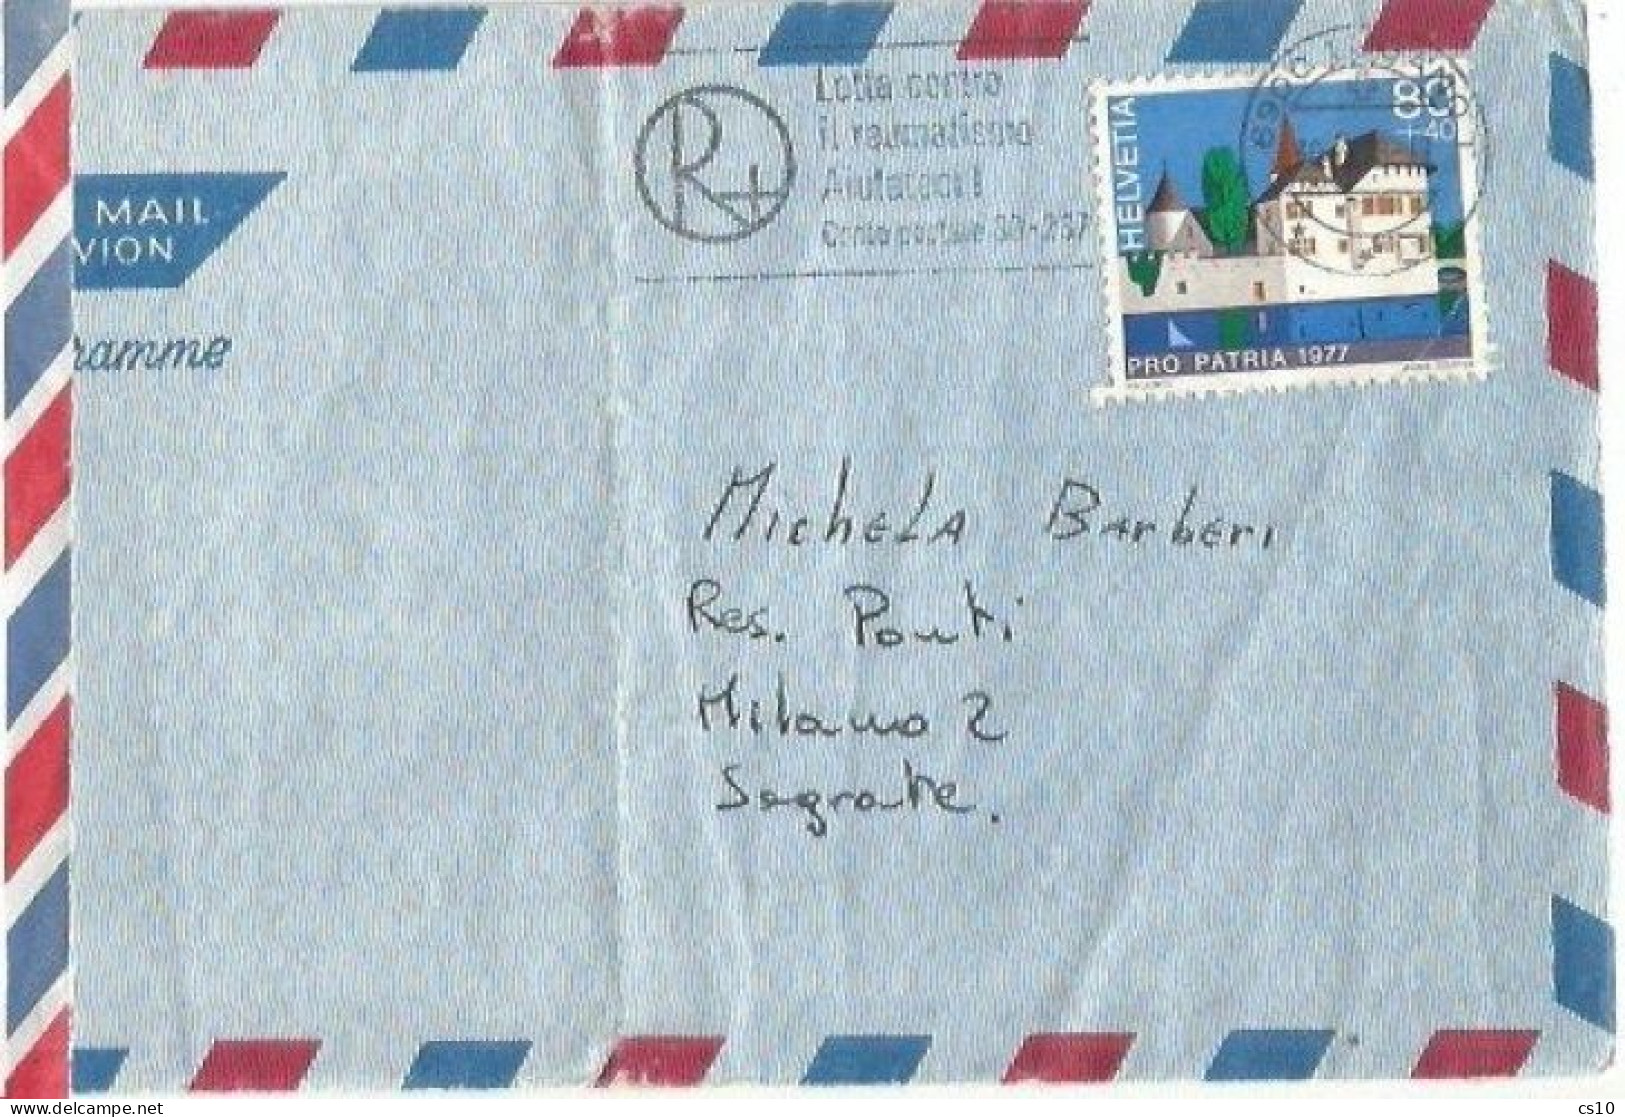 Suisse Airmail Cover Lugano 30aug1978 To Italy With ProPatria 1977 C.80+40 Solo Franking - Covers & Documents